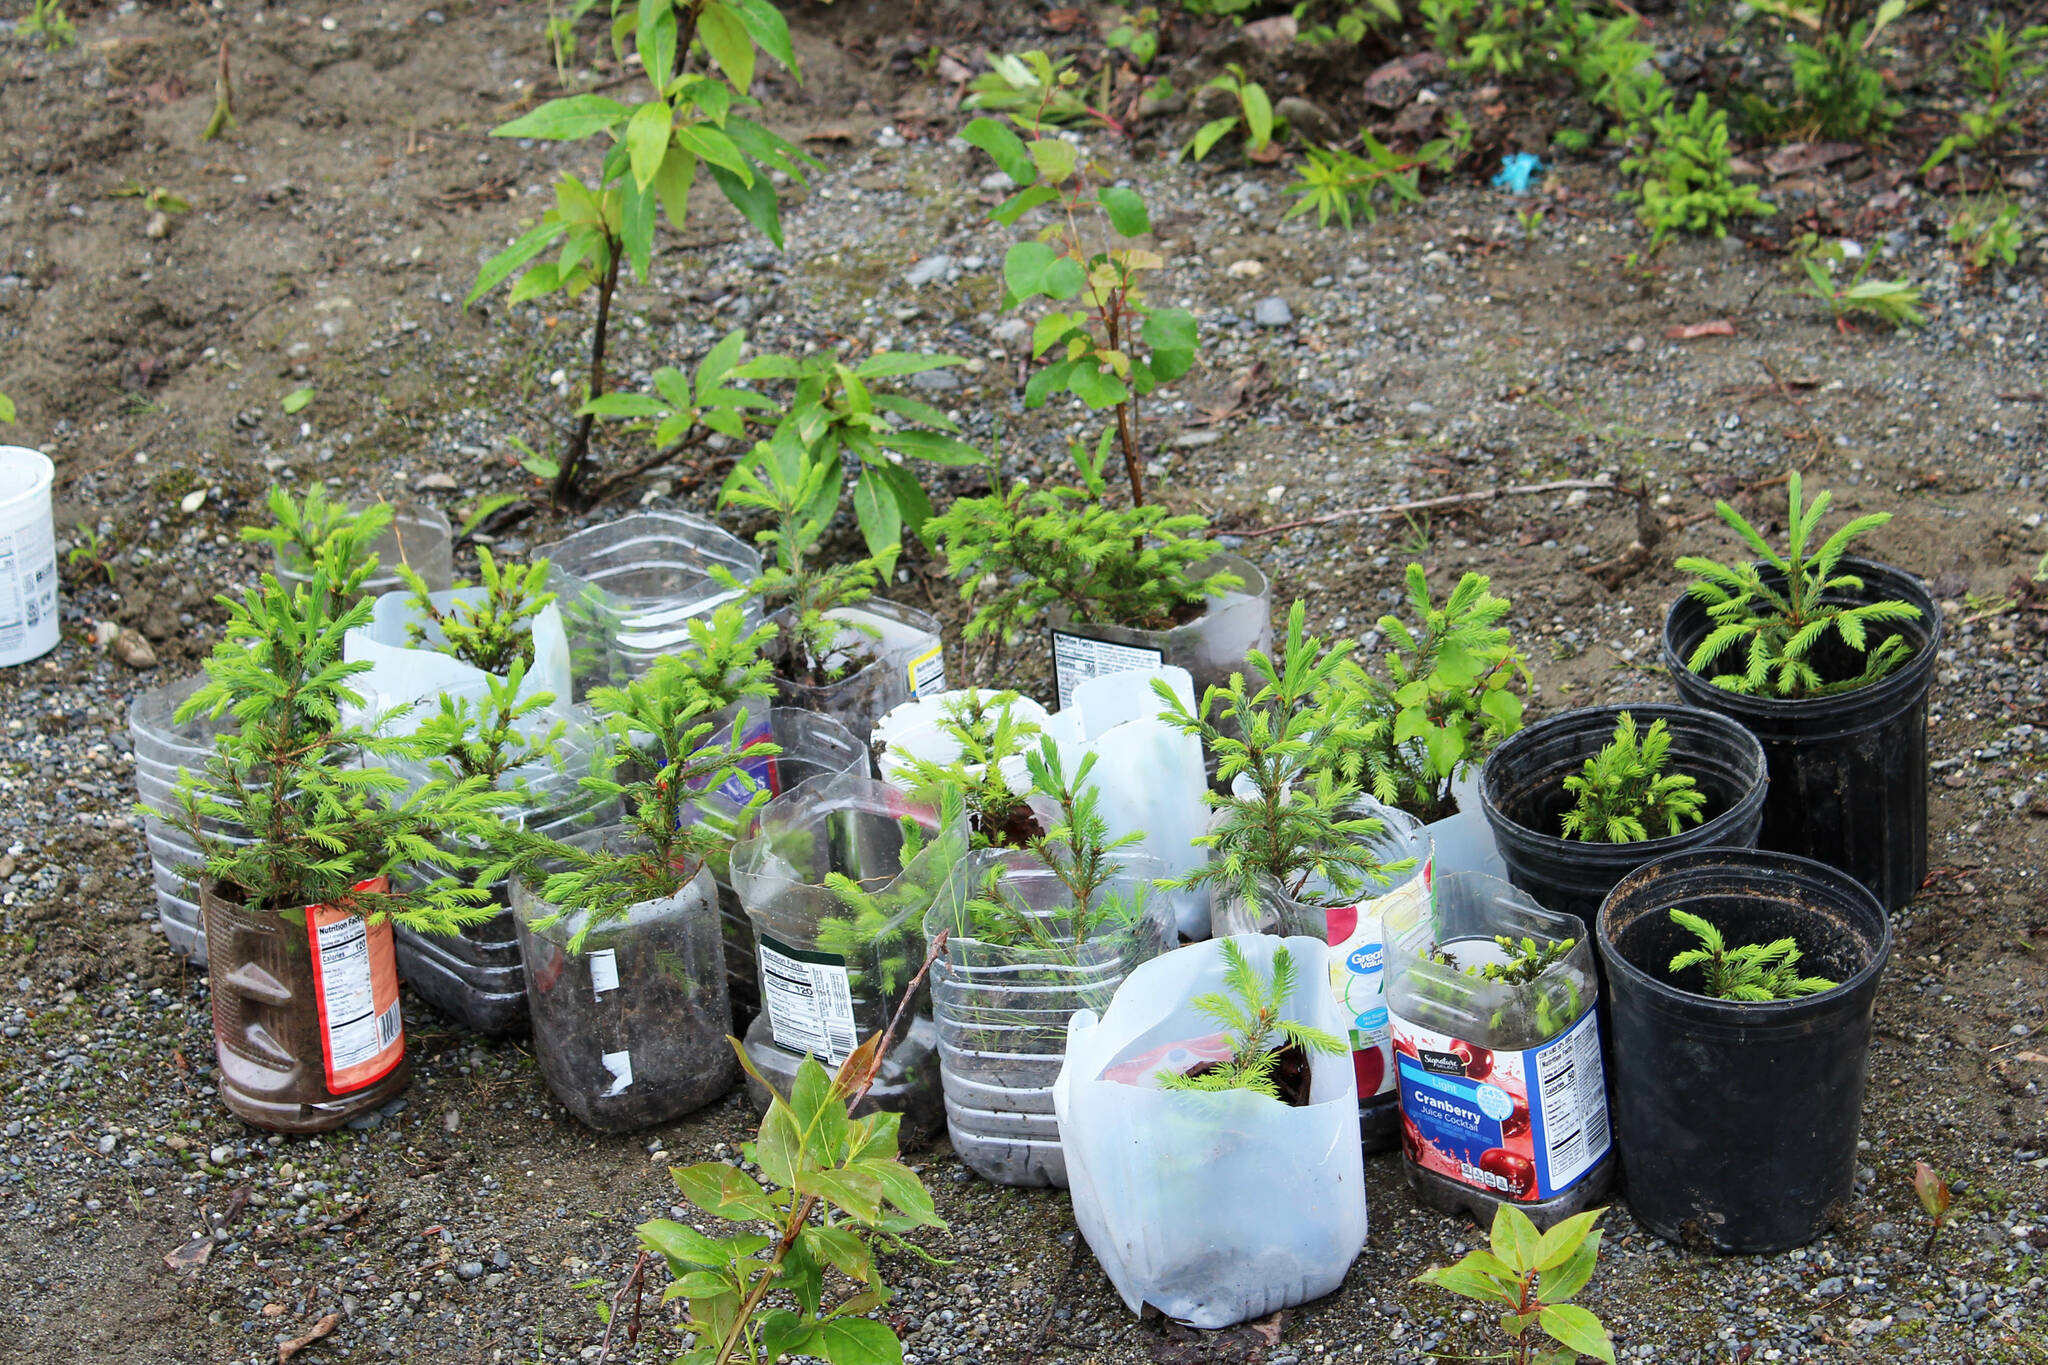 Baby white spruce trees sit newly potted near the Soldotna Regional Sports Complex on Tuesday, June 27, 2023 in Soldotna, Alaska. (Ashlyn O’Hara/Peninsula Clarion)